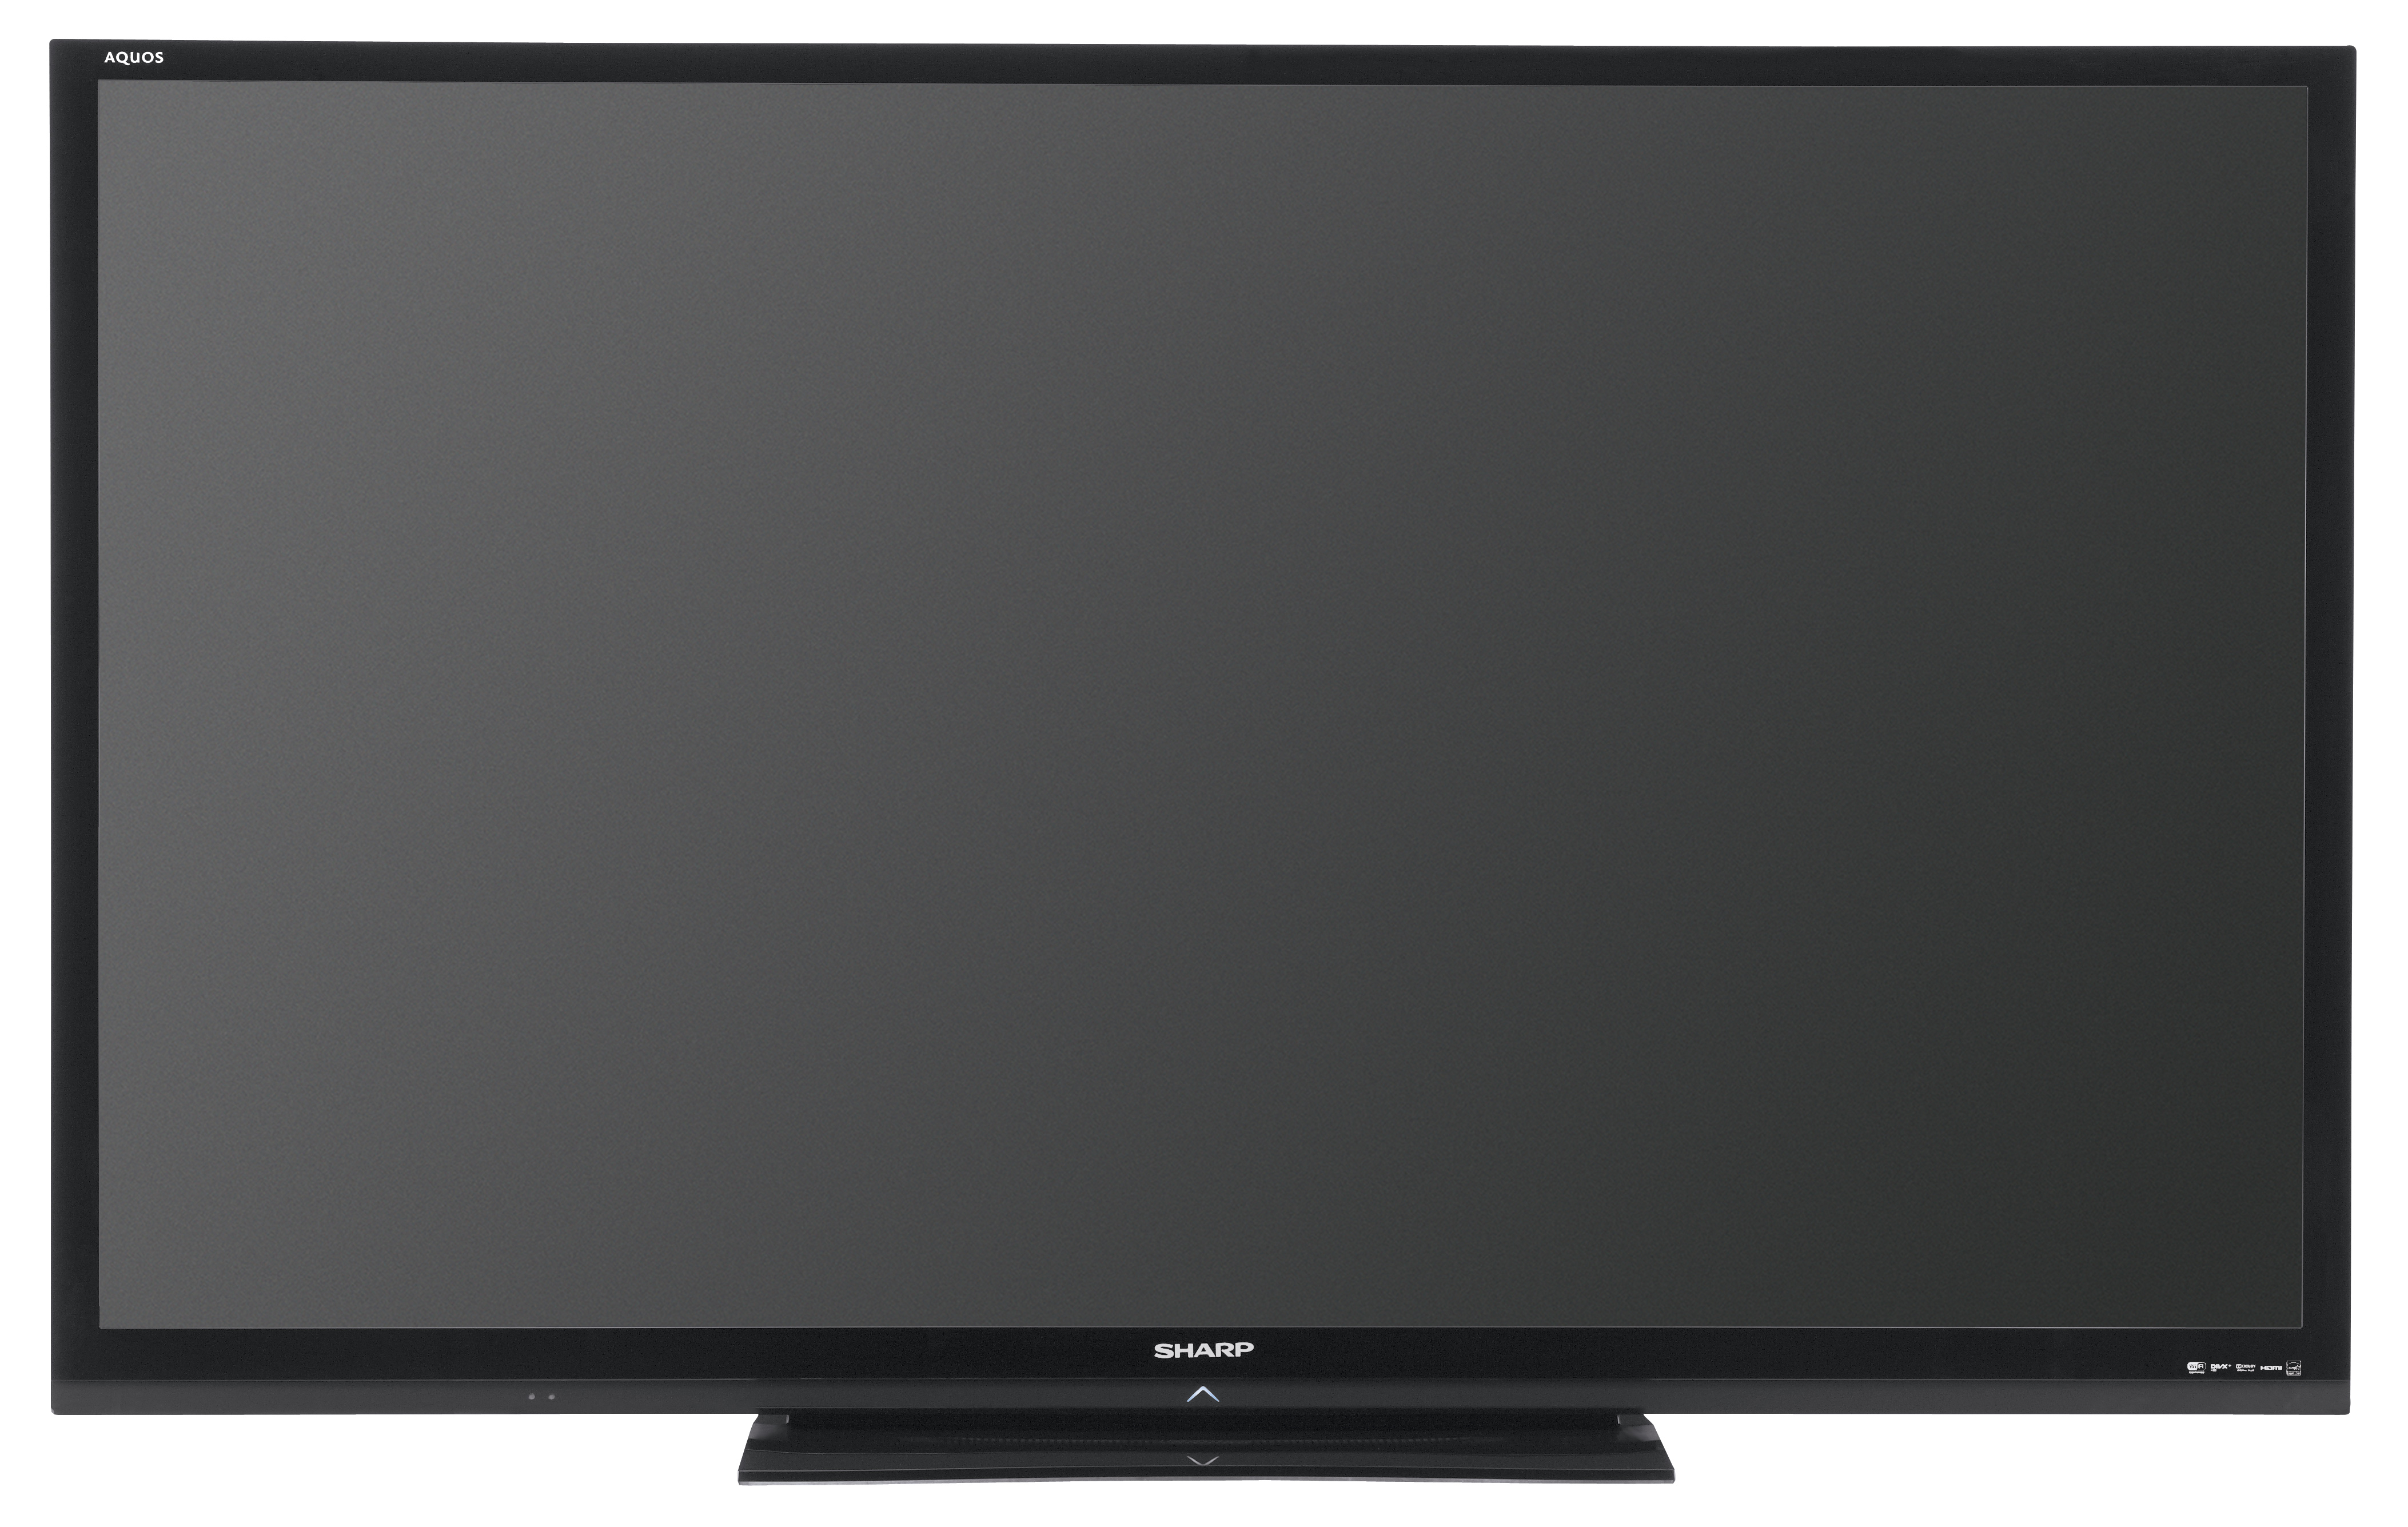 Sharp breaks records with first 80-inch LED LCD television